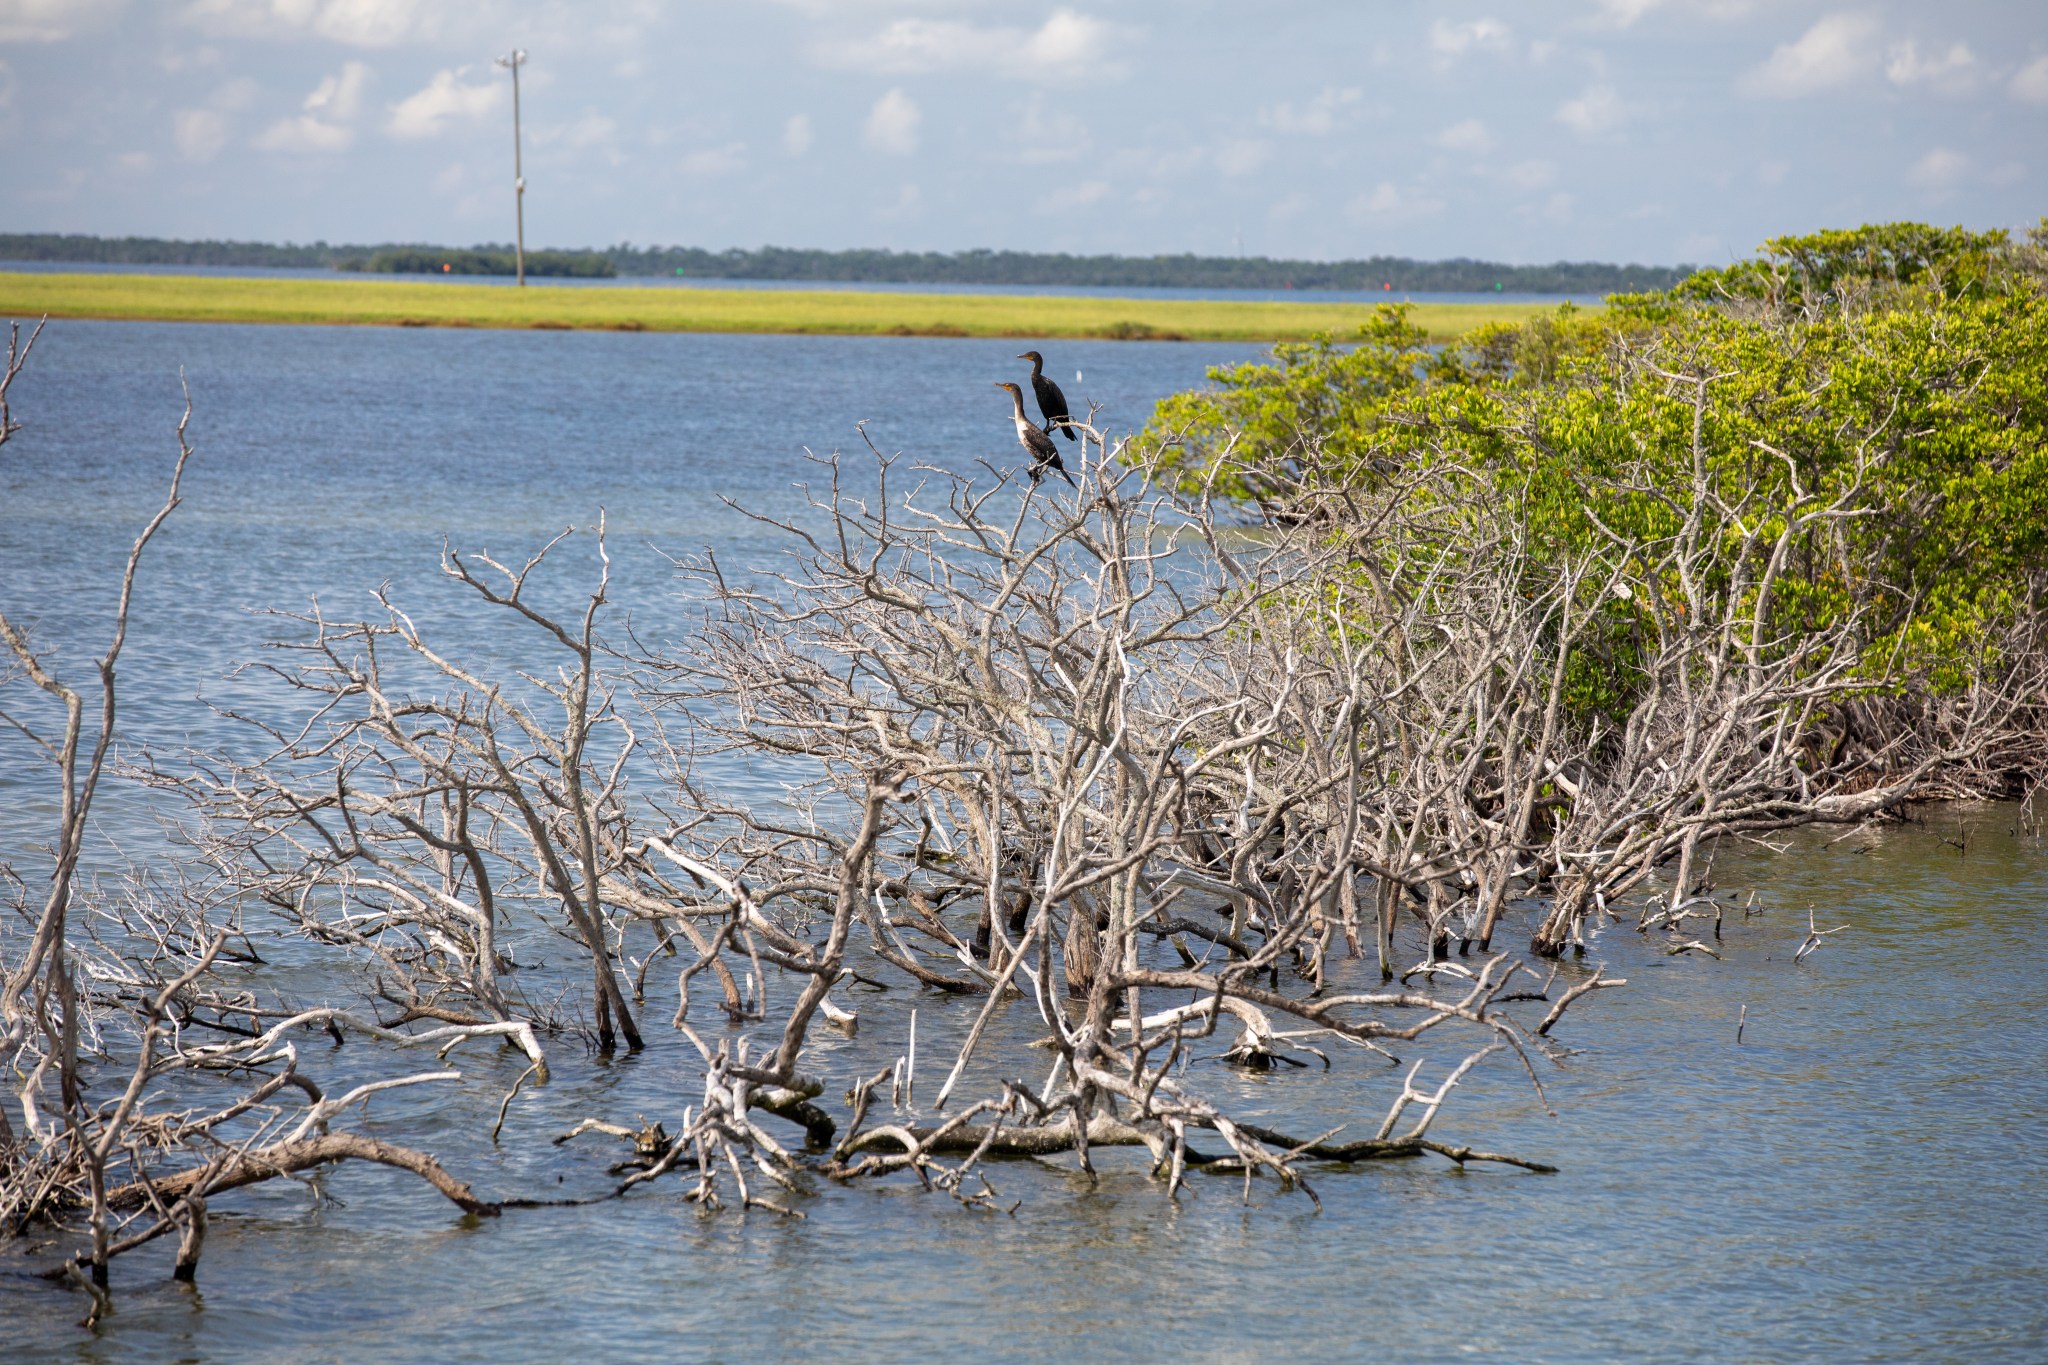 Kennedy Space Center's 140,000-acre property shares land with the Merritt Island National Wildlife Refuge and the Canaveral National Seashore. 